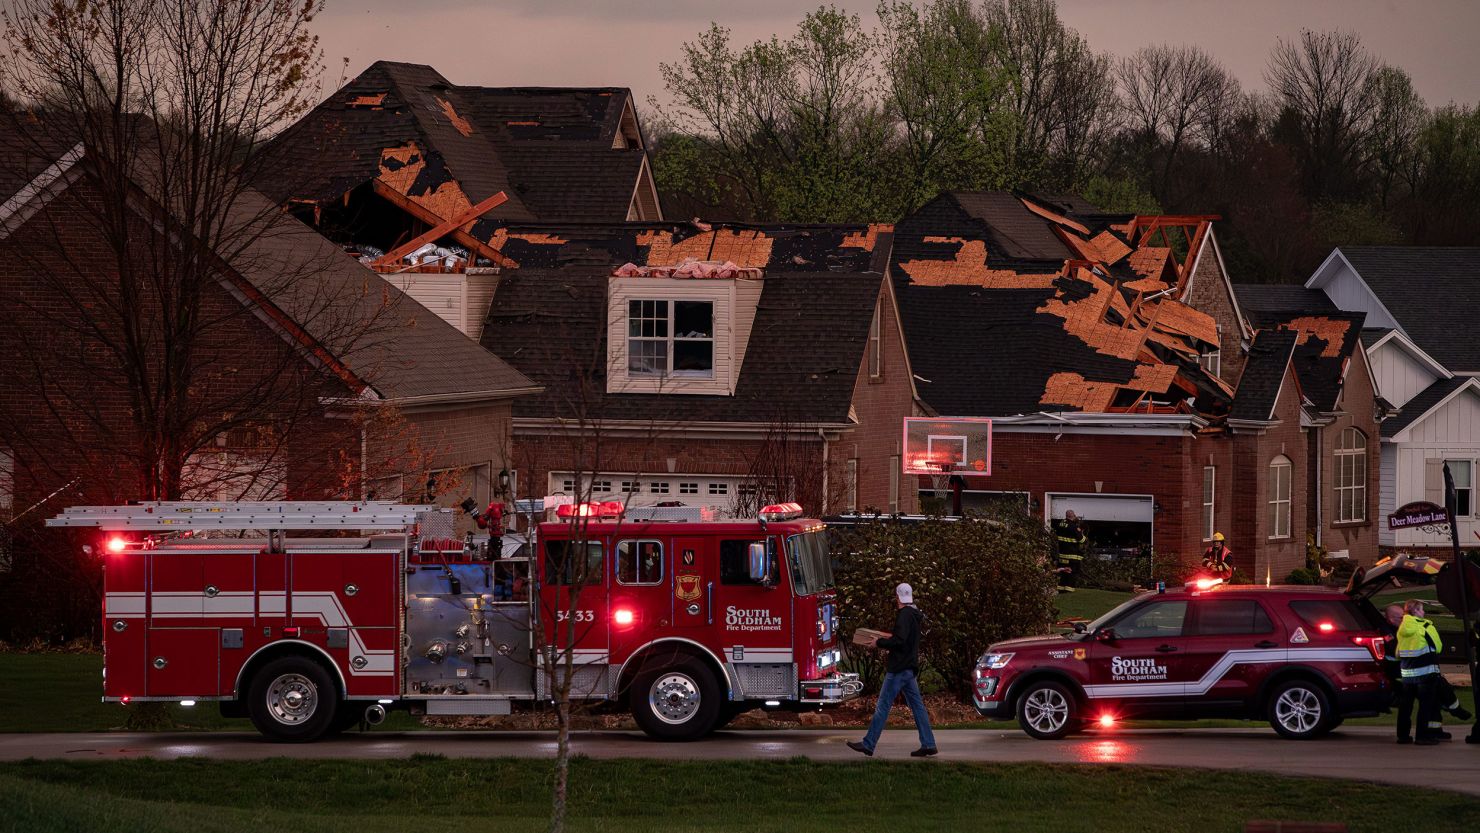 Emergency personnel respond to storm damage in Buckner, Kentucky, after several houses were damaged when severe storms hit the area on Tuesday.